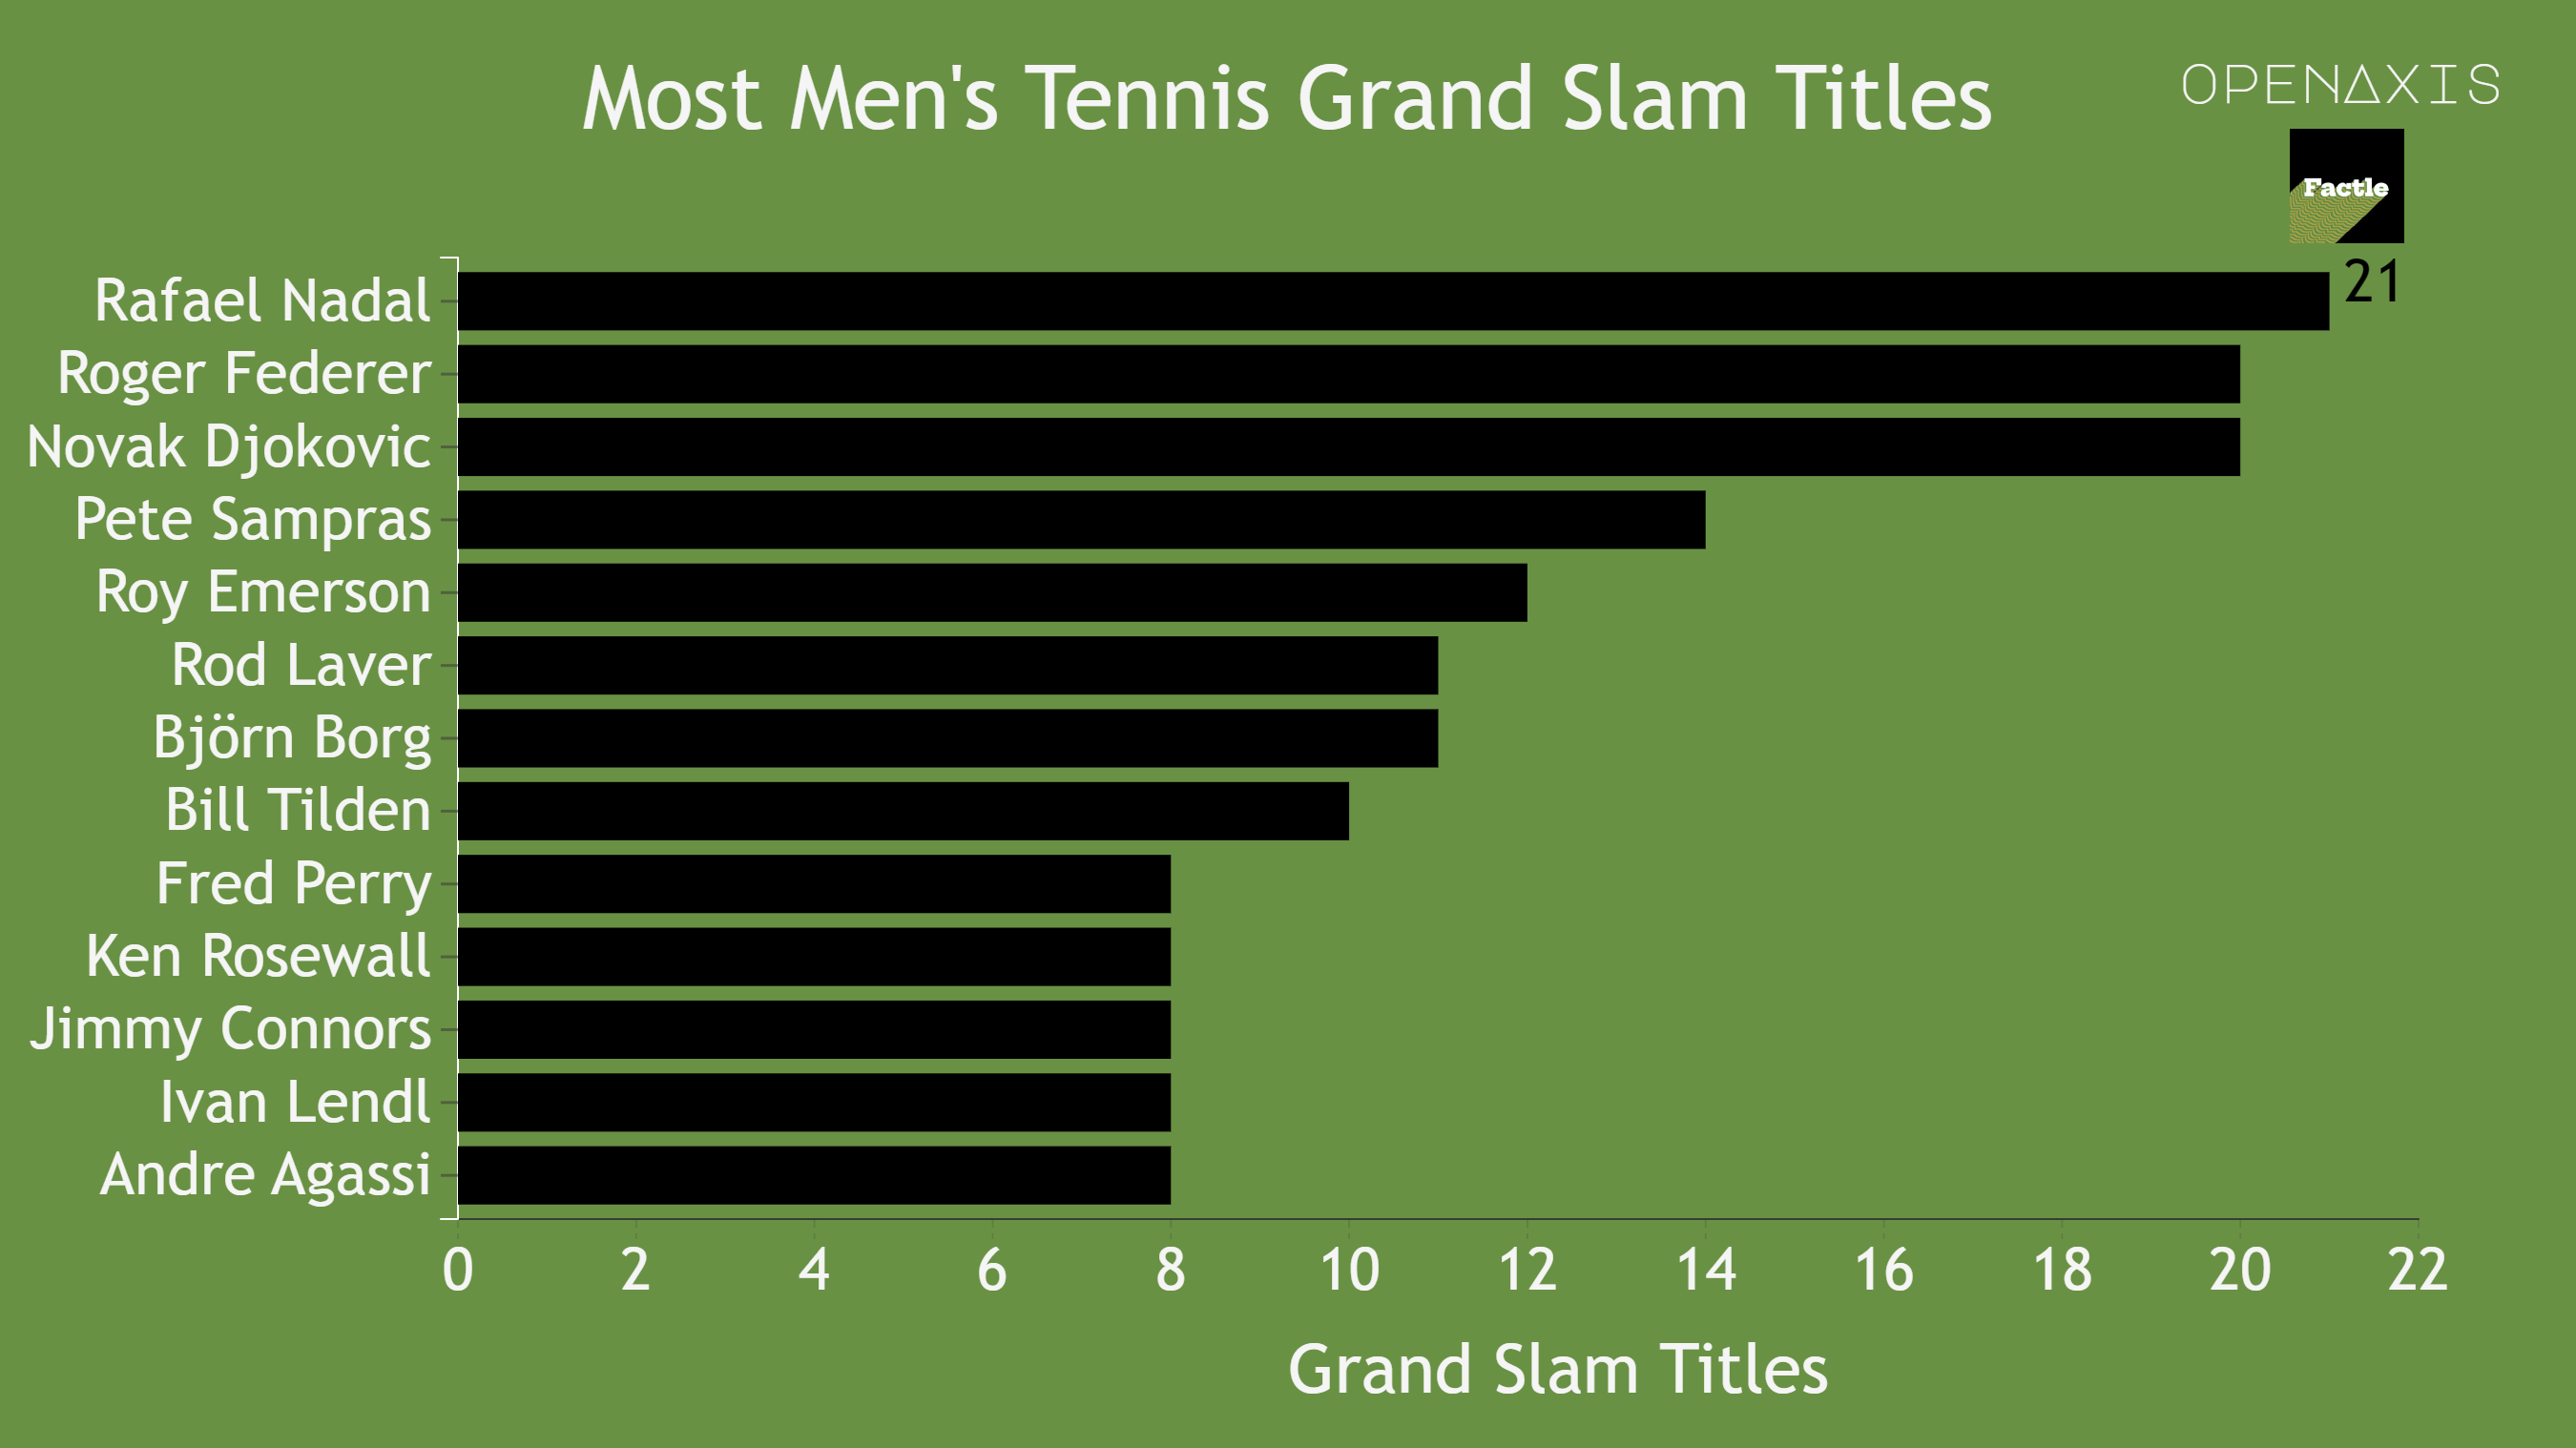 <p>The Grand Slam tournaments, also known as the majors, are the four most important annual tennis tournaments worldwide.</p><p><br /></p><p>The Australian Open (played on hard court) is the first major of the year, taking place in mid-January, followed by French Open (played on clay) in May/June. Wimbledon, the only of the four majors to be played on grass, takes place in June/July, and the Grand Slam season finishes with the US Open (hard court) played in August/September.</p><p><br /></p><p>Legendary Spanish tennis player Rafael Nadal currently tops the list of the most Grand Slam tennis titles won of all time by professional male tennis players. He edges two other legendary players, Serbian Novak Djokovic and Swiss Roger Federer both sit at 20 titles.</p><p><br /></p><p><span data-index="0" data-denotation-char data-id="0" data-value="&lt;a href=&quot;/search?q=%23tennis&quot; target=_self&gt;#tennis" data-link="/search?q=%23tennis">﻿<span contenteditable="false"><span></span><a href="/search?q=%23tennis" target="_self">#tennis</a></span>﻿</span></p><p><br /></p><p>Source: <a href="/data/3737" target="_blank">ATP Tour, ESPN</a></p><p><br /></p>